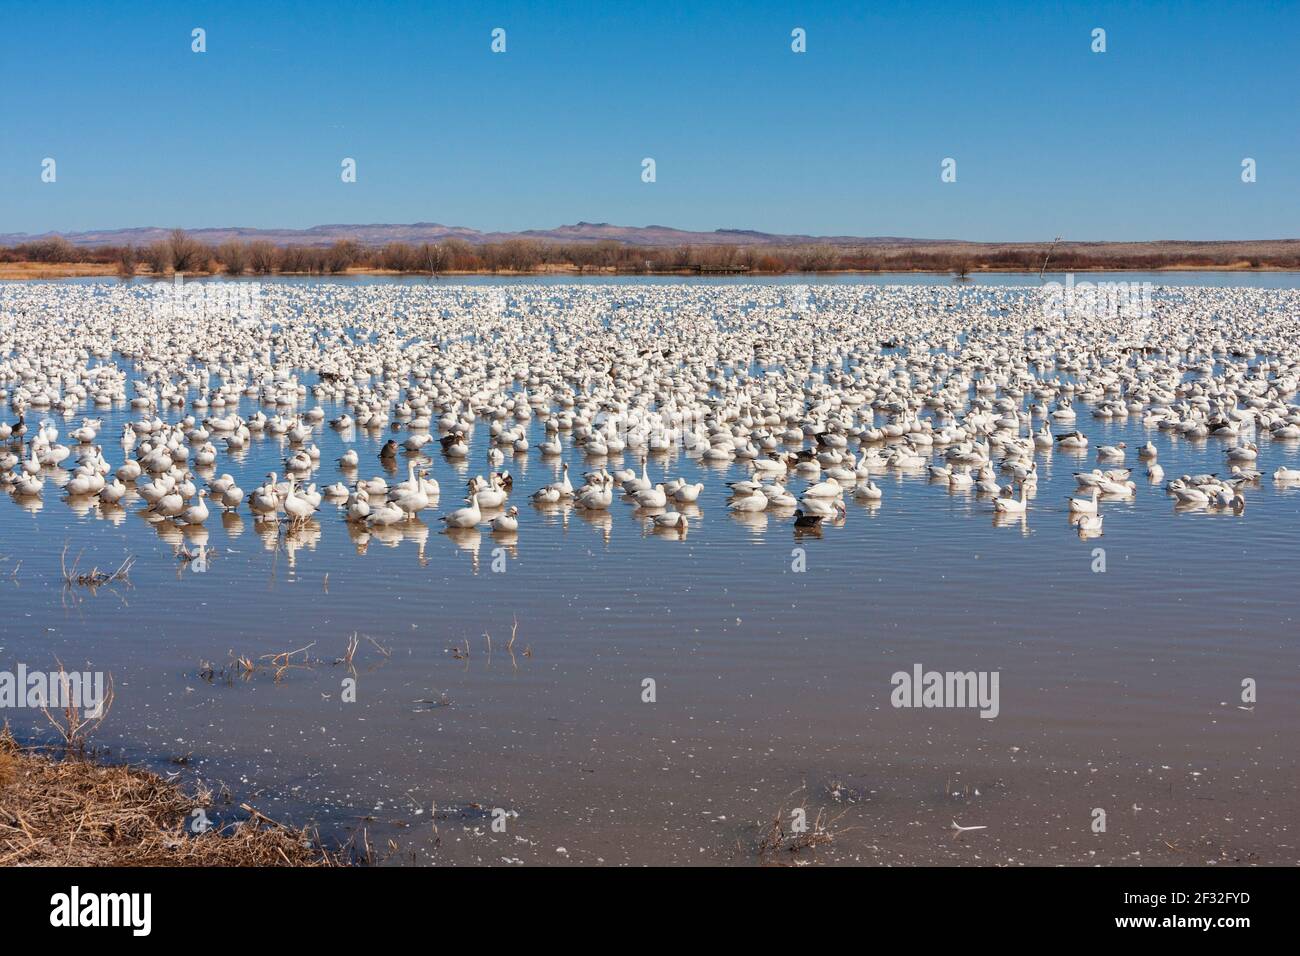 Snow Geese, Chen caerulescens, at Bosque del Apache National Wildlife Refuge. At Bosque, tens of thousands of birds spend the winter. Stock Photo